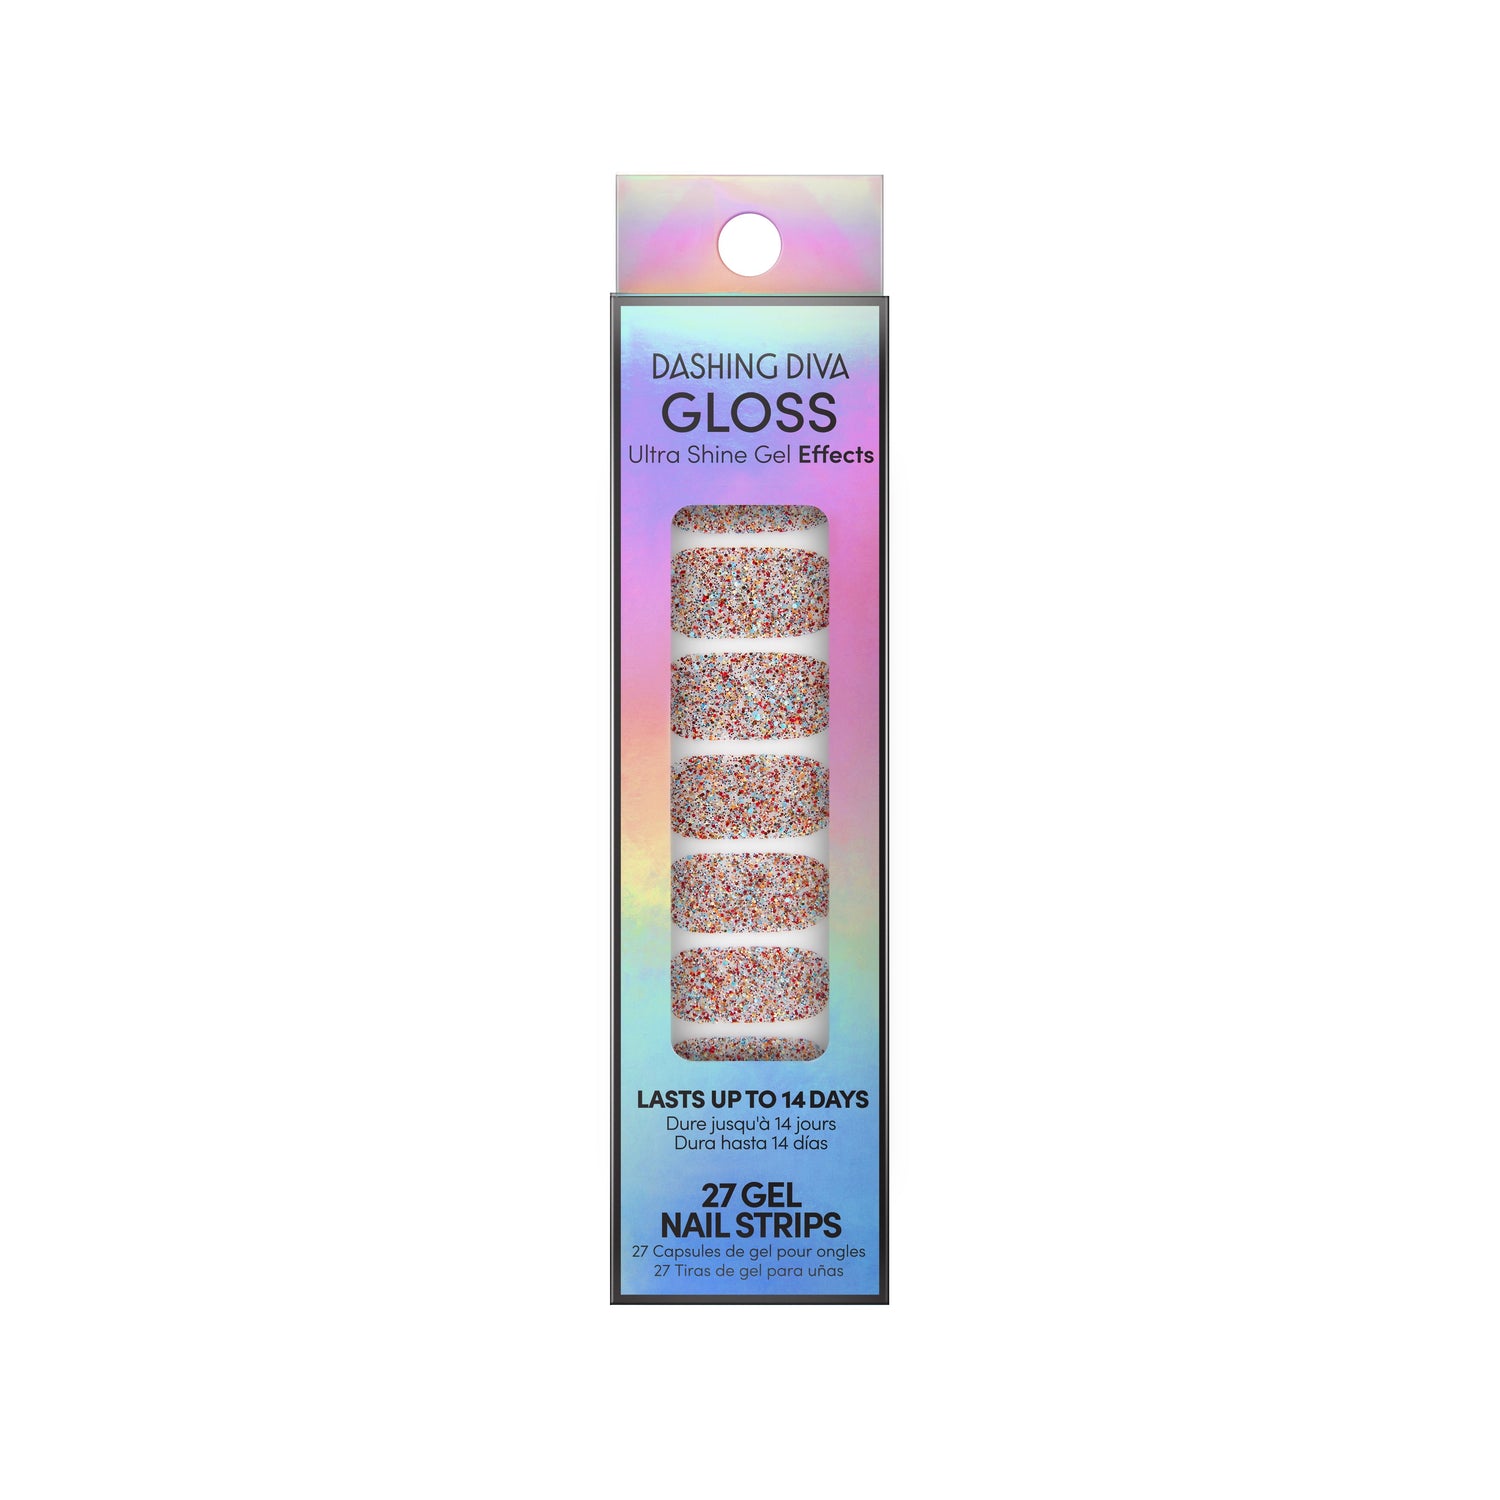 Dashing Diva GLOSS Effects Holiday multicolor glitter gel nail strips.